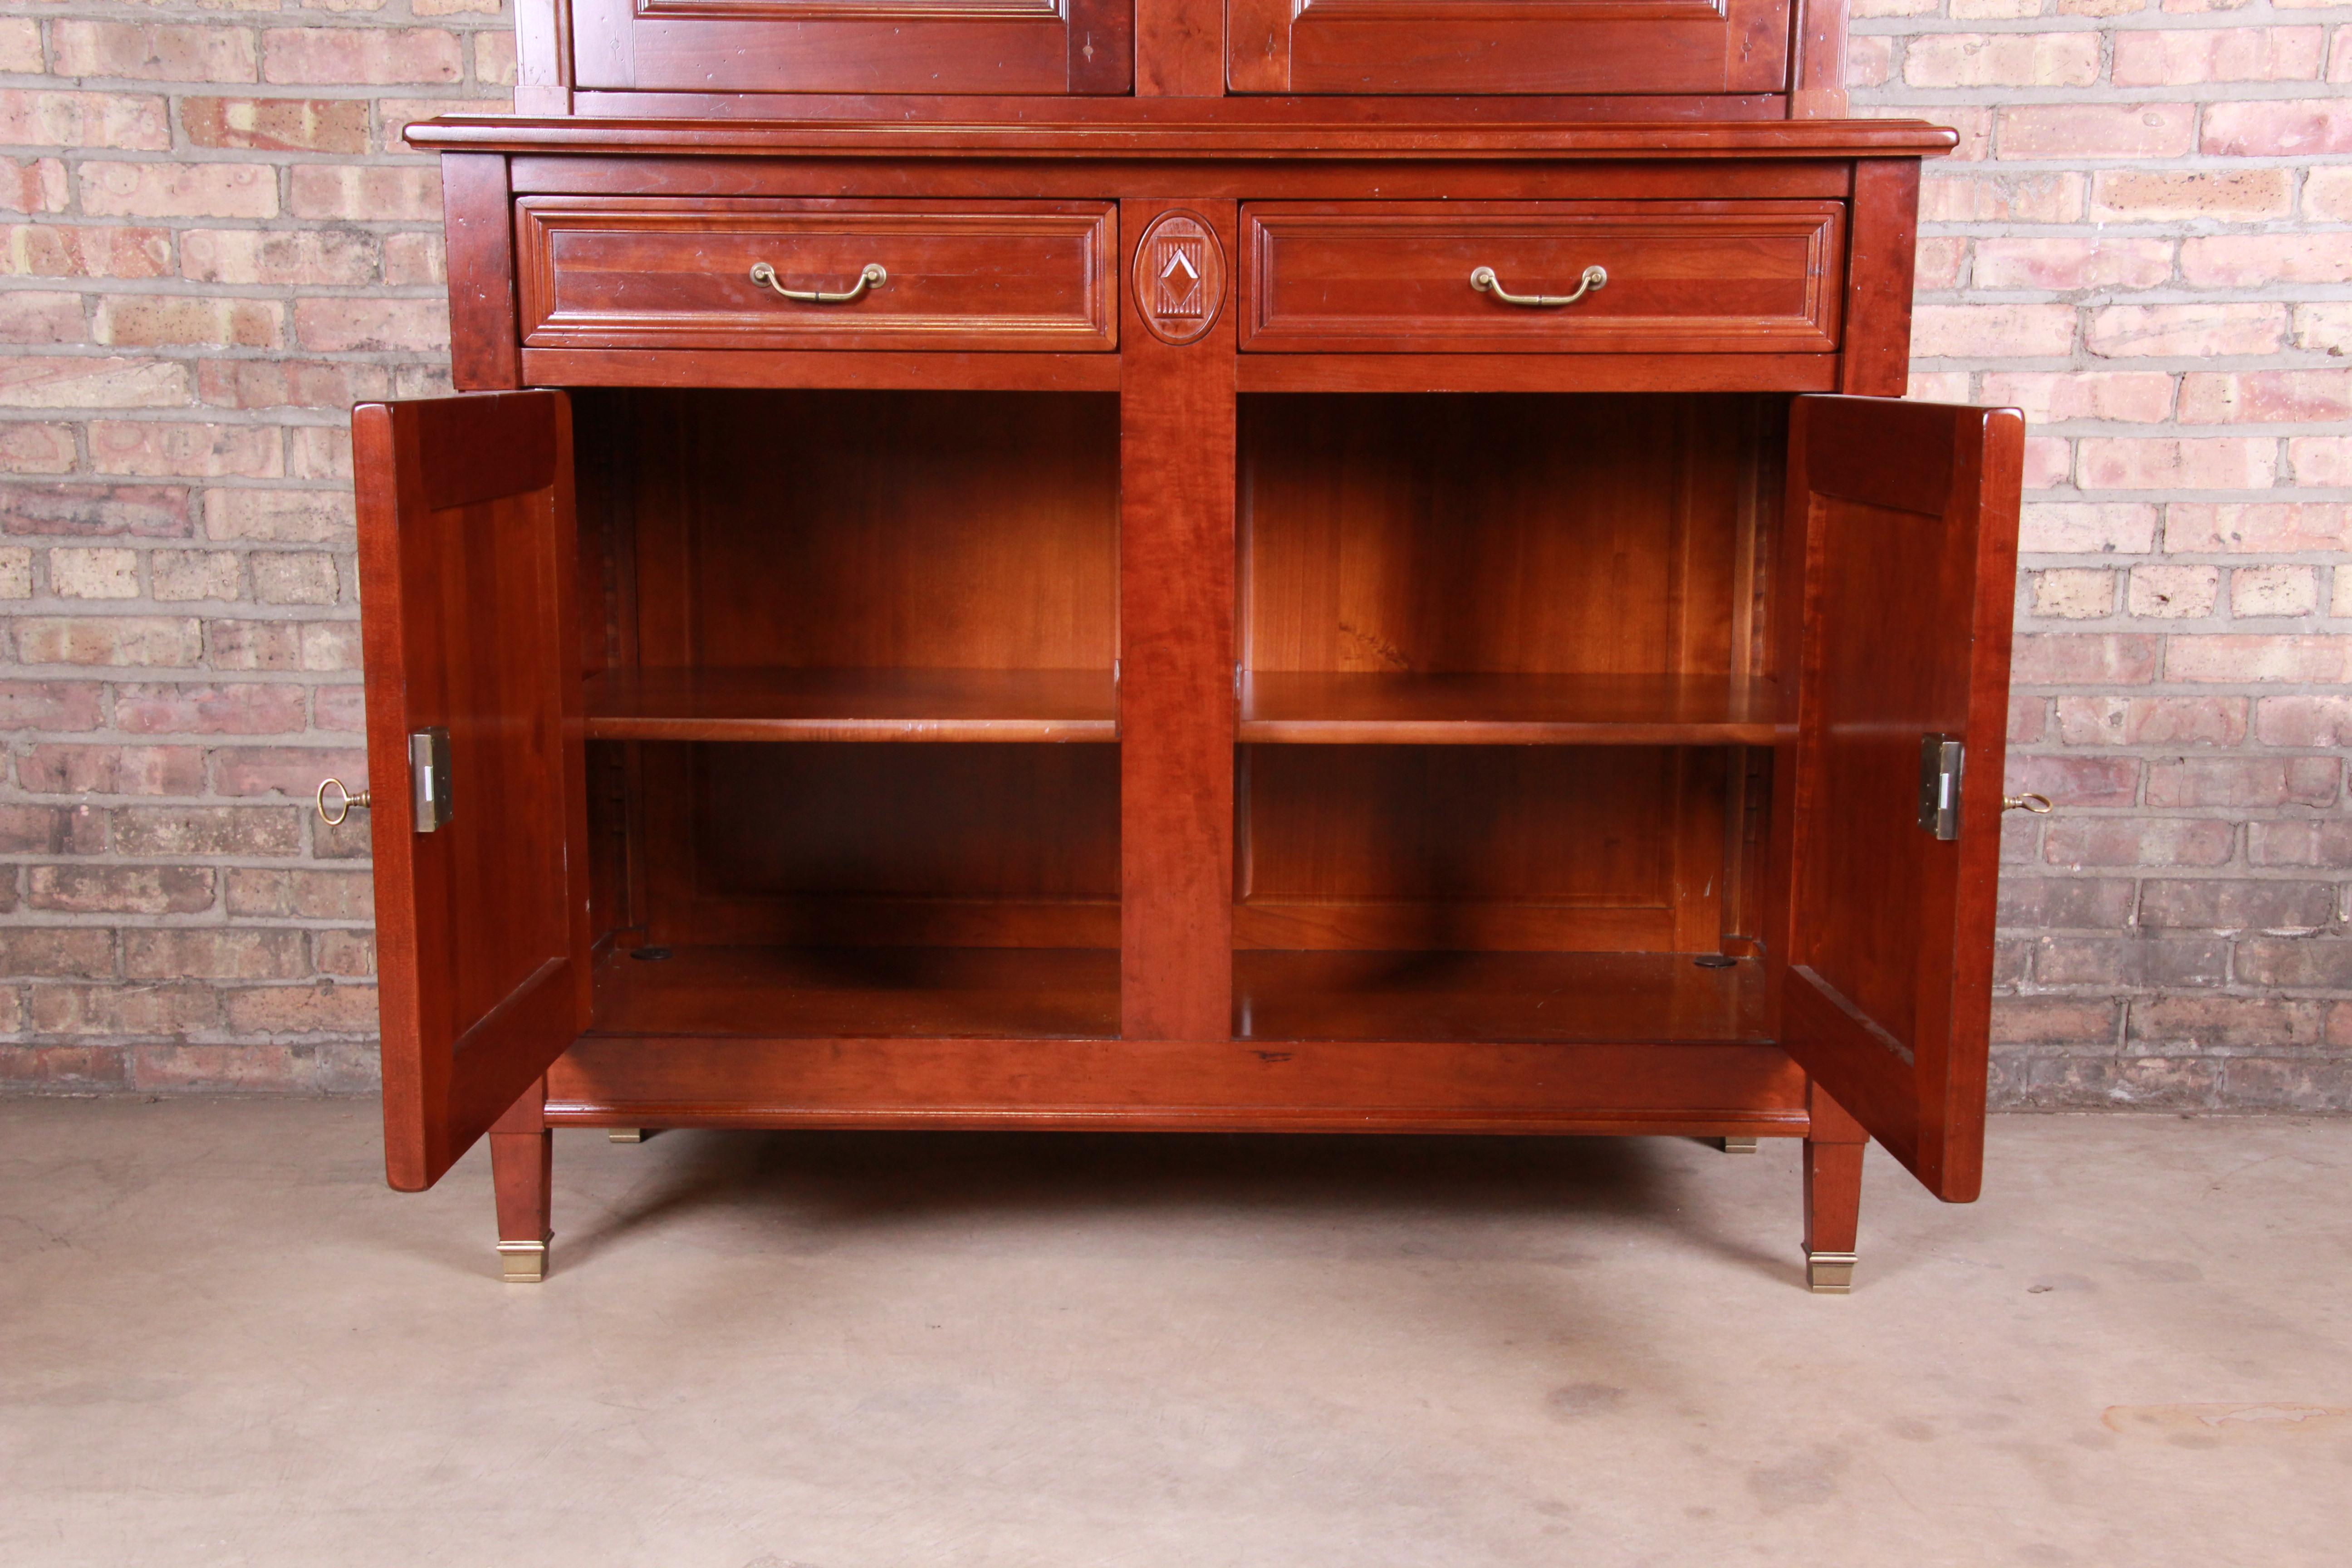 French Provincial Solid Cherry Breakfront Bookcase or Bar Cabinet by Grange 5